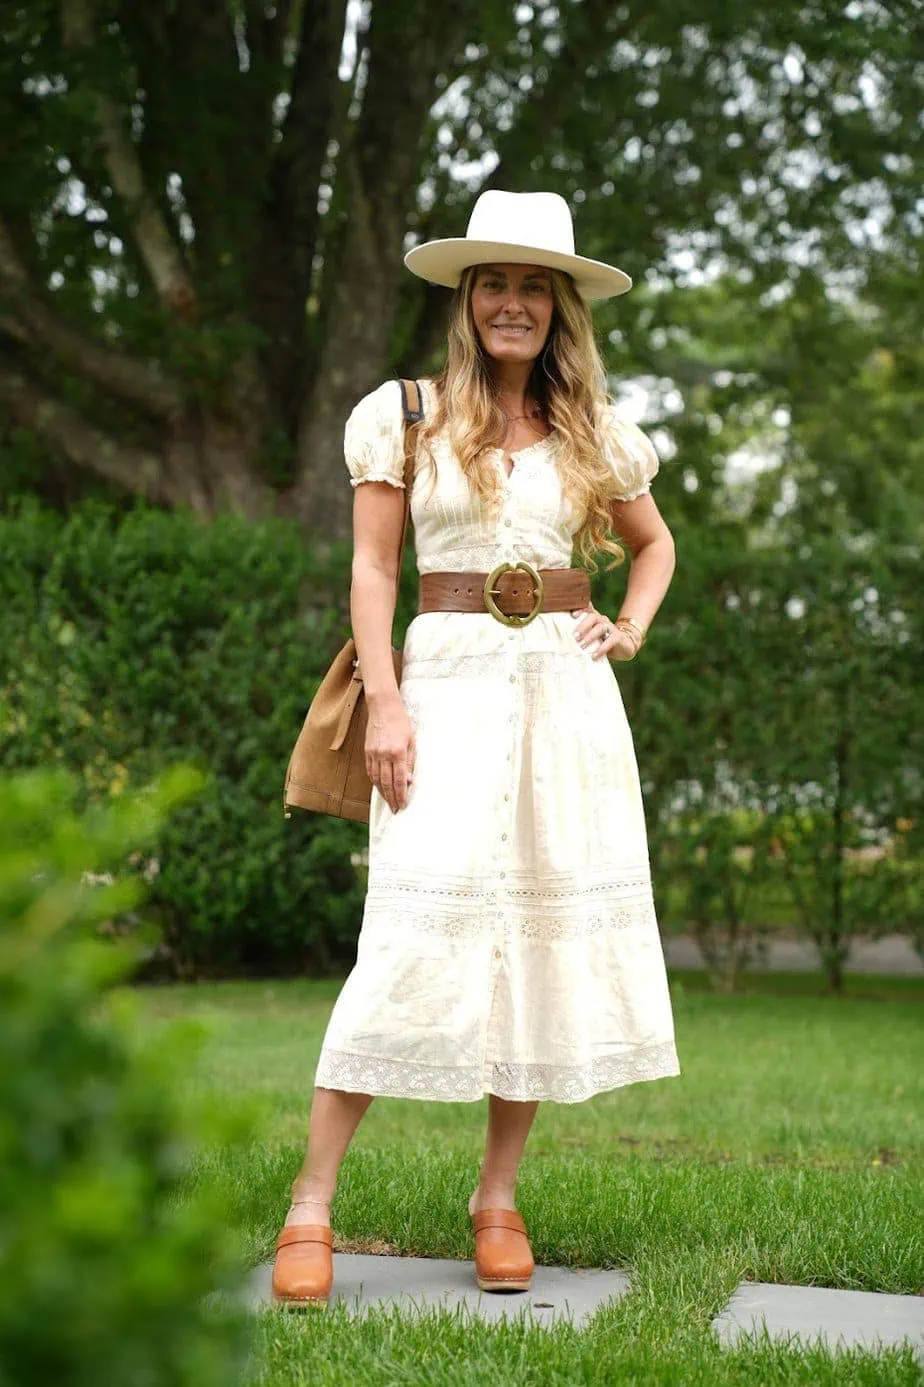 Brianne sporting cute look of yellow dress, country hat, and brown clogs 